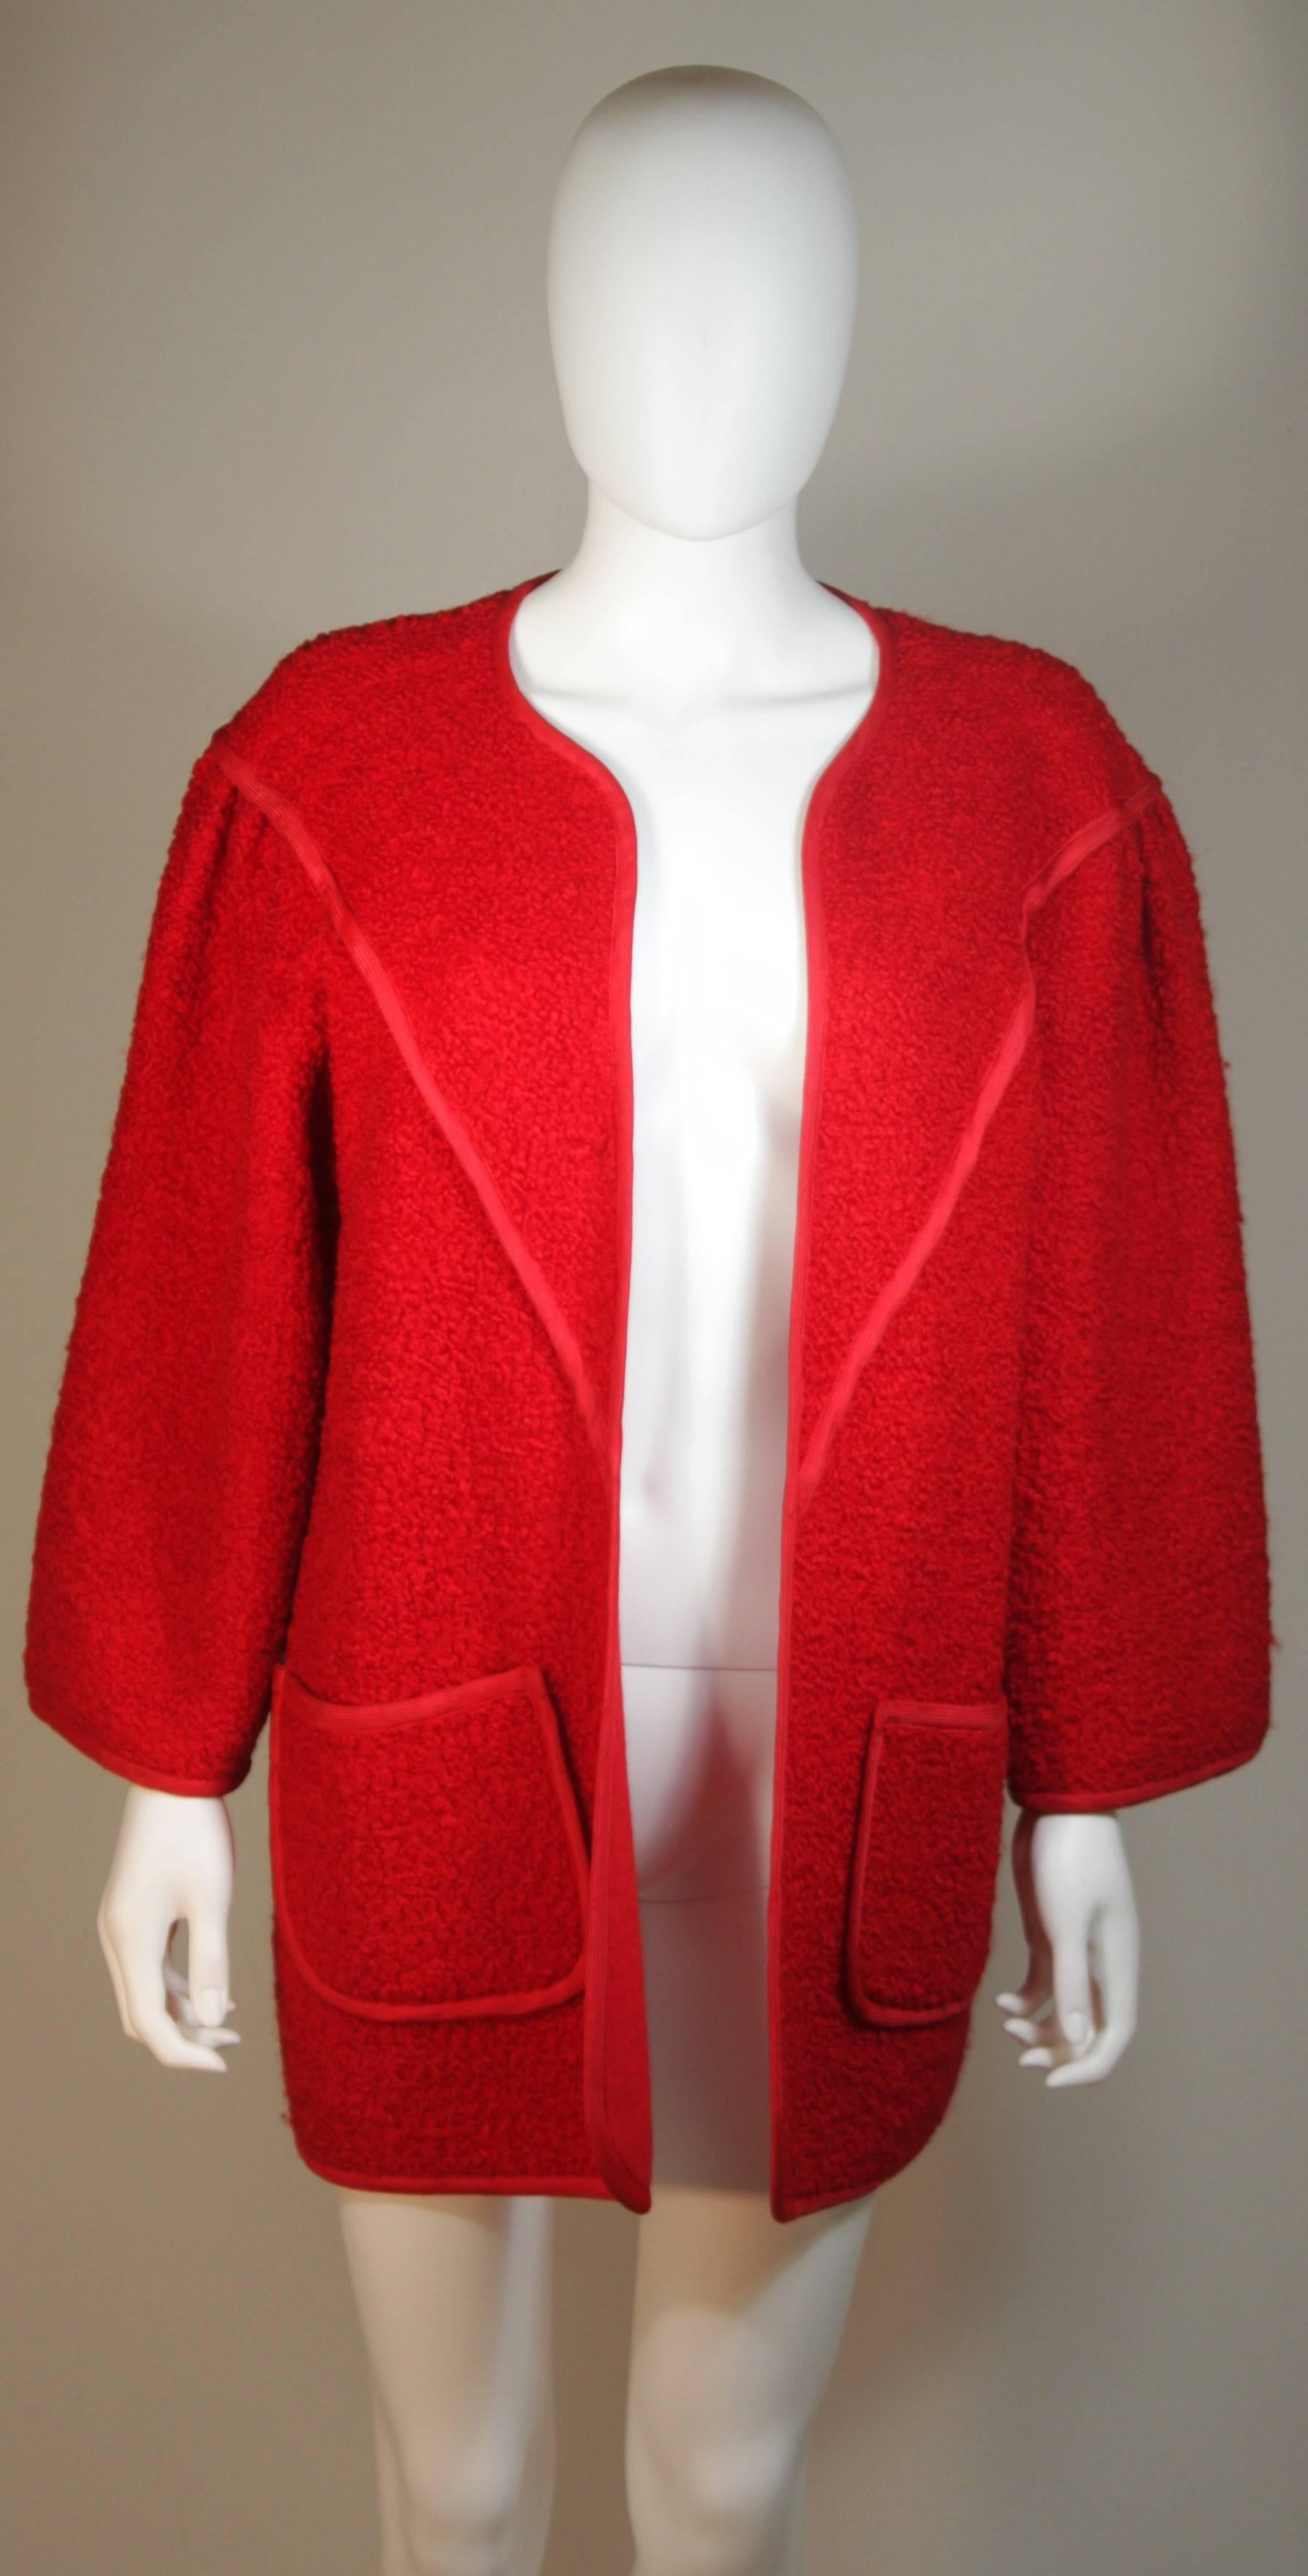 This Jean Muir  coat is composed of vibrant red wool. Features large front pockets and an open style design. In excellent condition. Made in England.

  **Please cross-reference measurements for personal accuracy. 

Measurements (Approximately) 